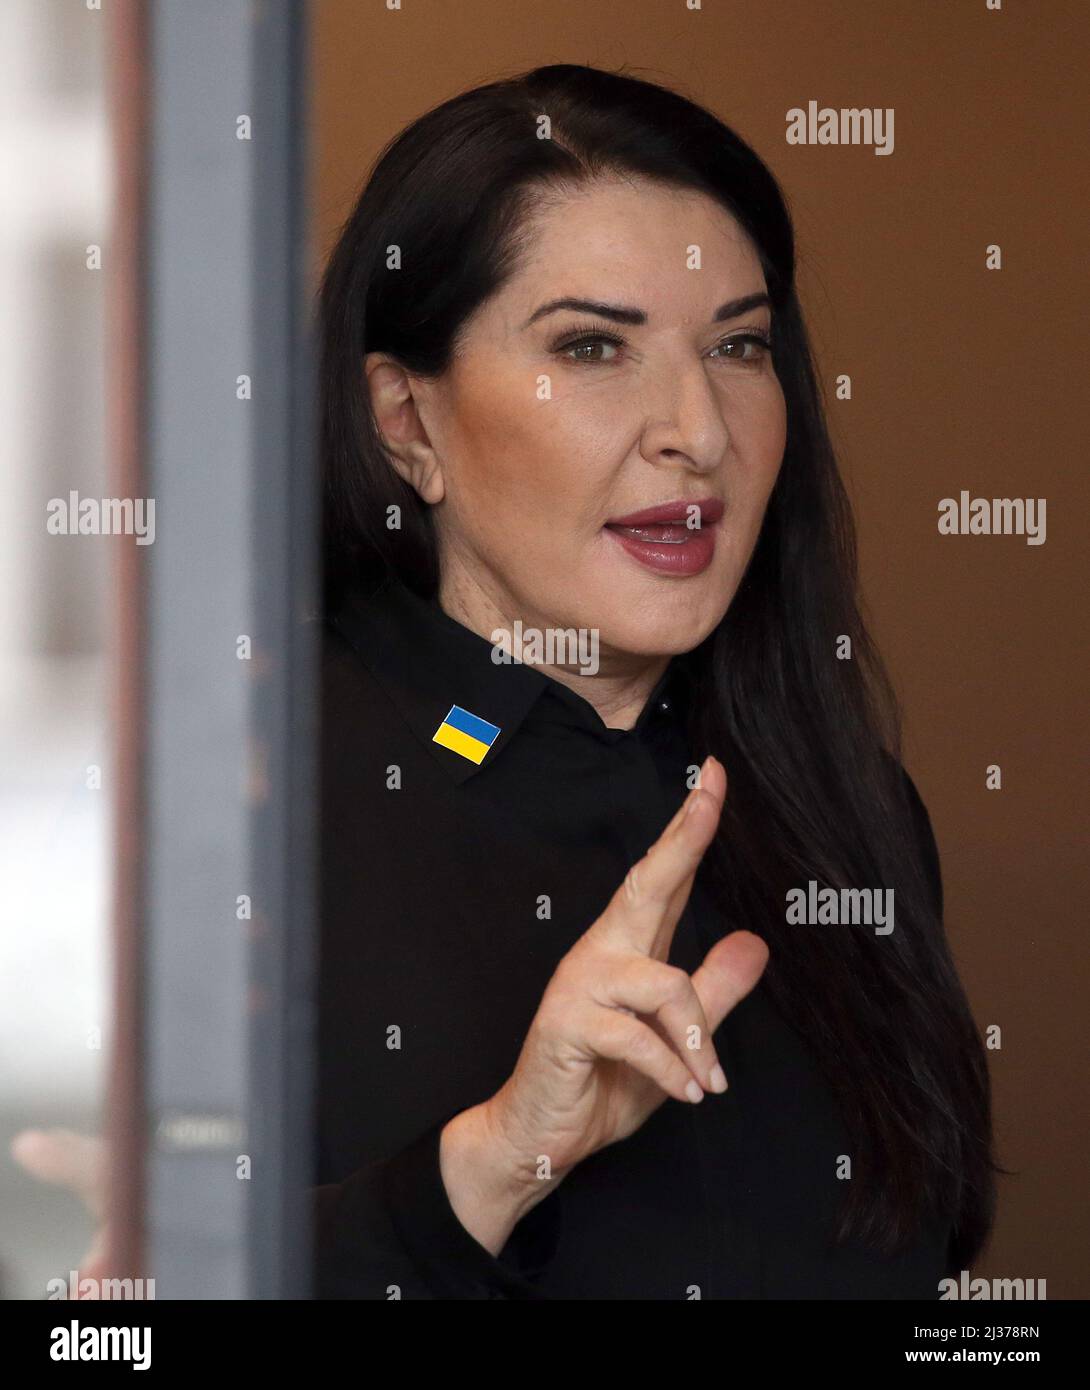 Berlin, Germany. 06th Apr, 2022. Performance artist Marina Abramovic chats  with Deutsche Oper staff at the beginning of a press conference on the  opera project "7 Deaths of Maria Callas". She wears